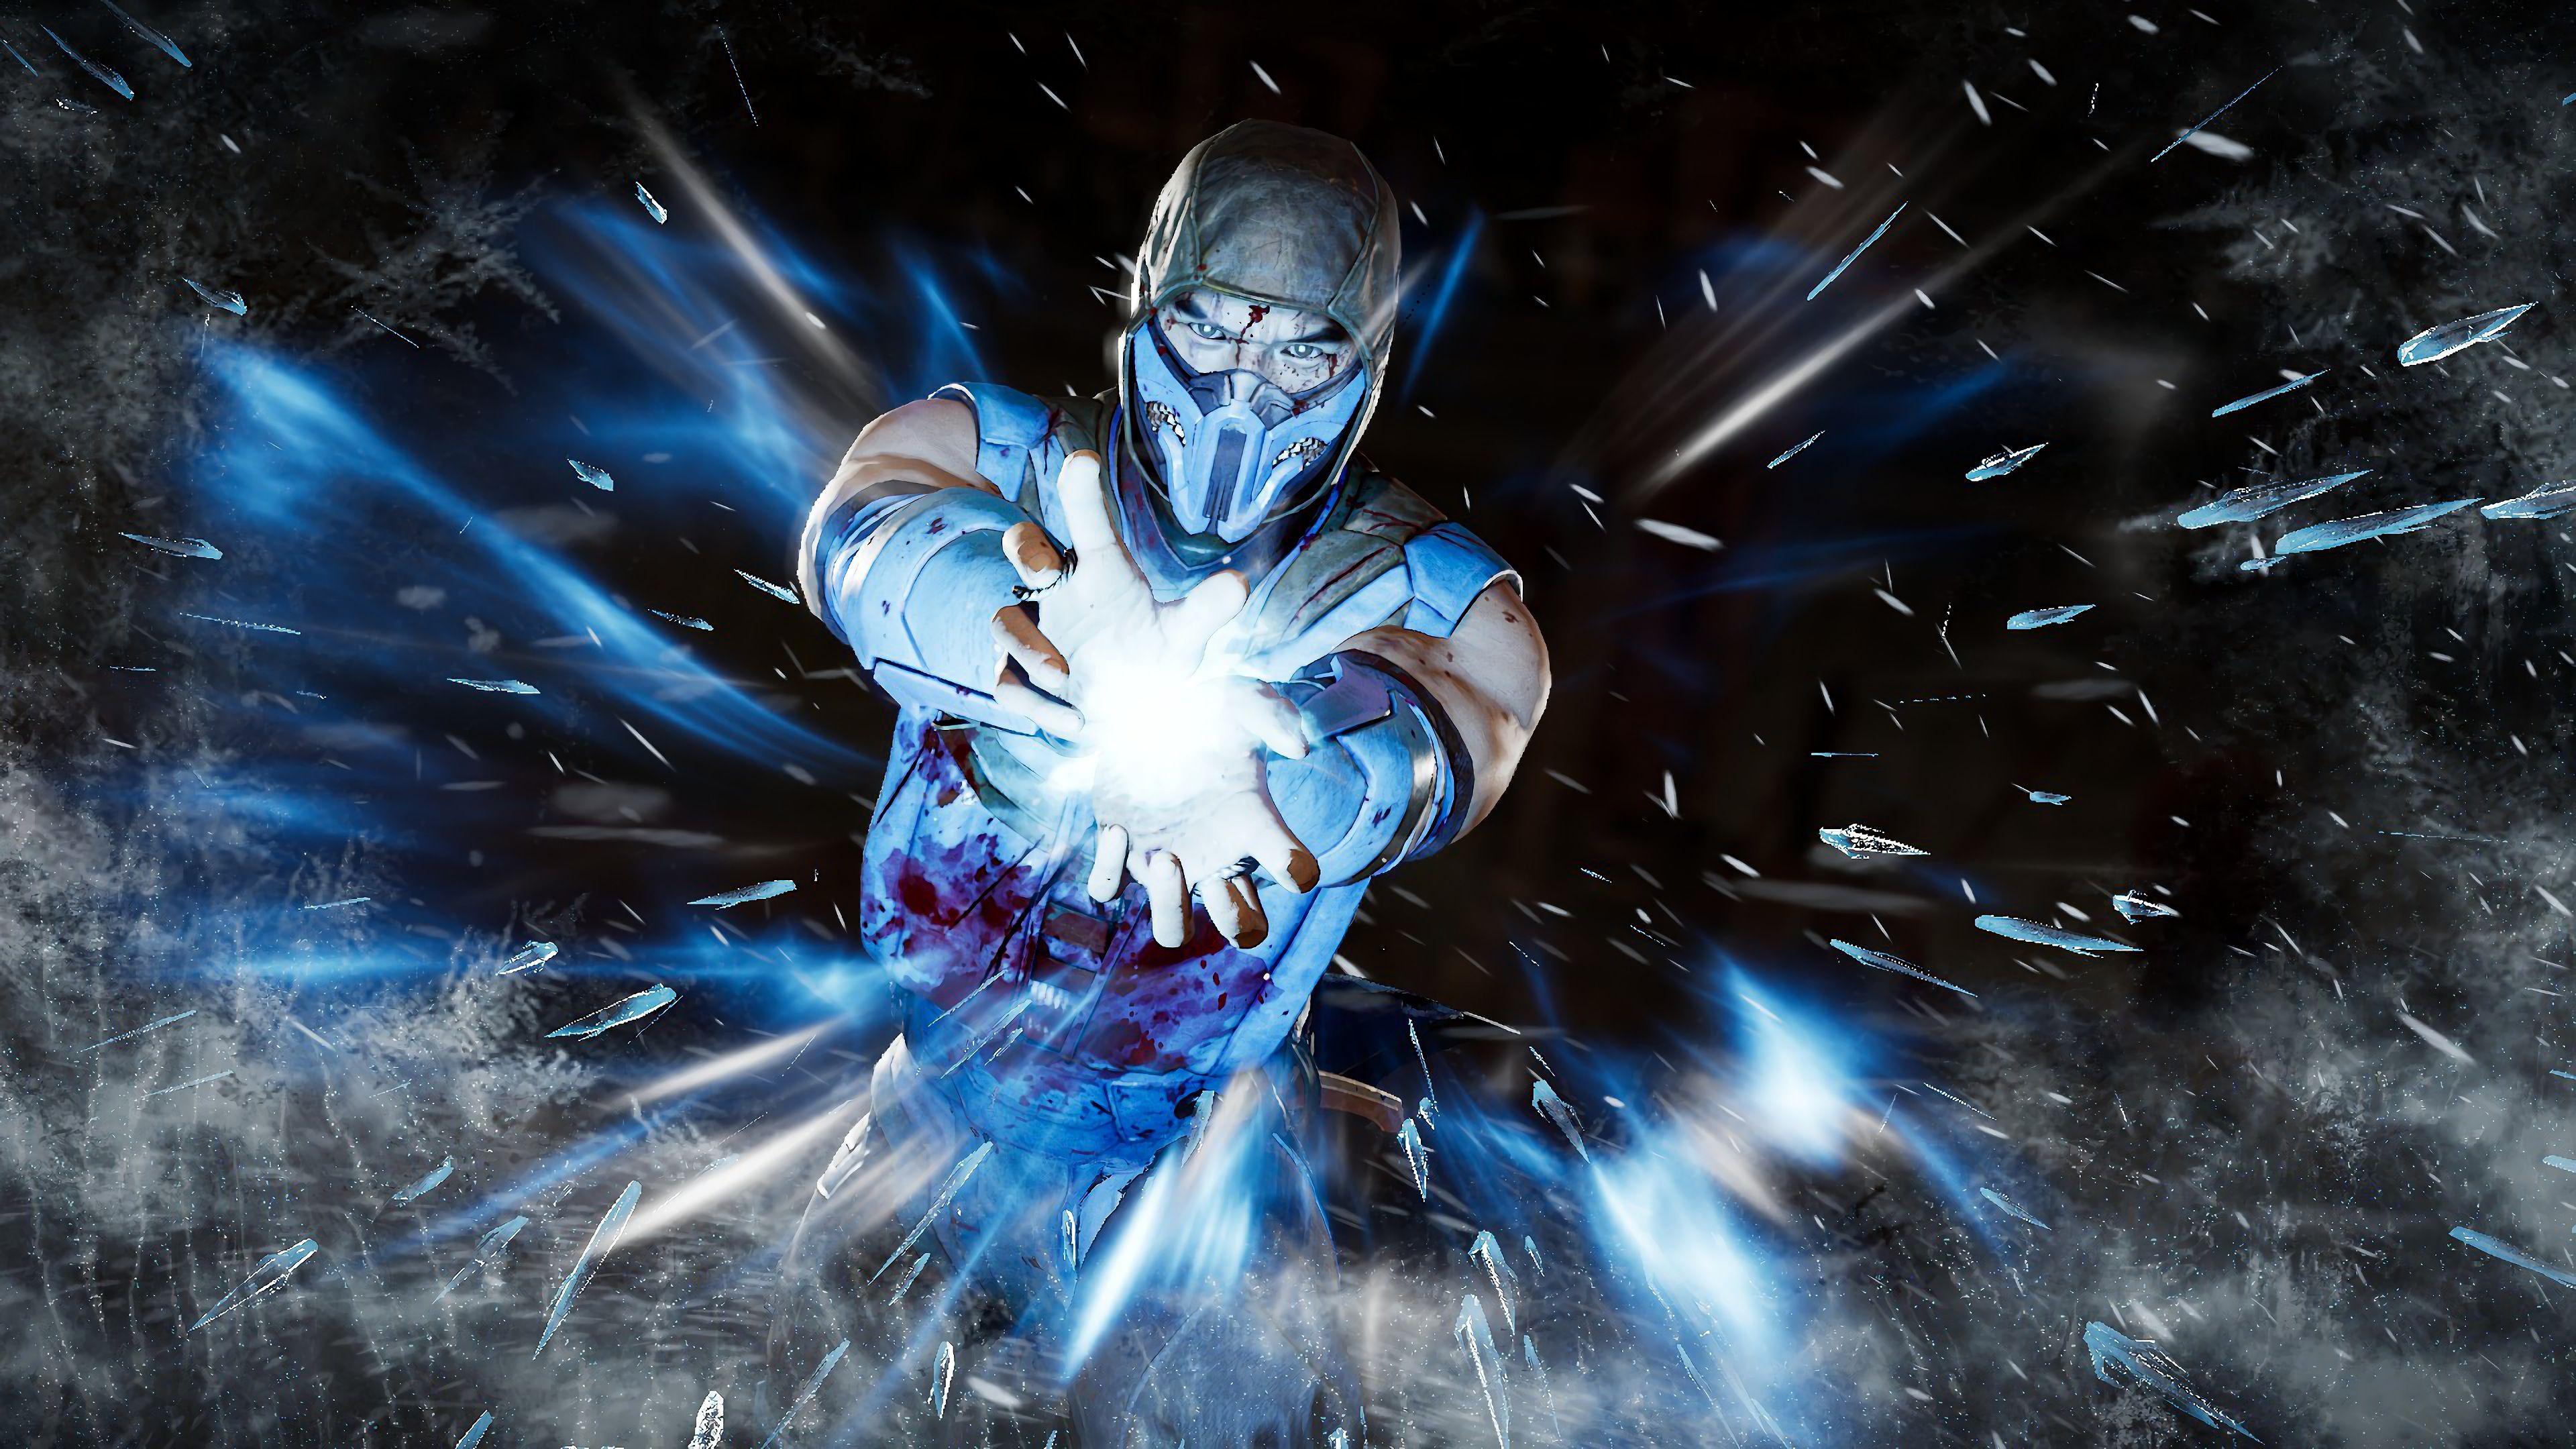 Sub Zero Mortal Kombat Fan Art With Power Effect 4k HD Games 4k Wallpapers  Images Backgrounds Photos and Pictures